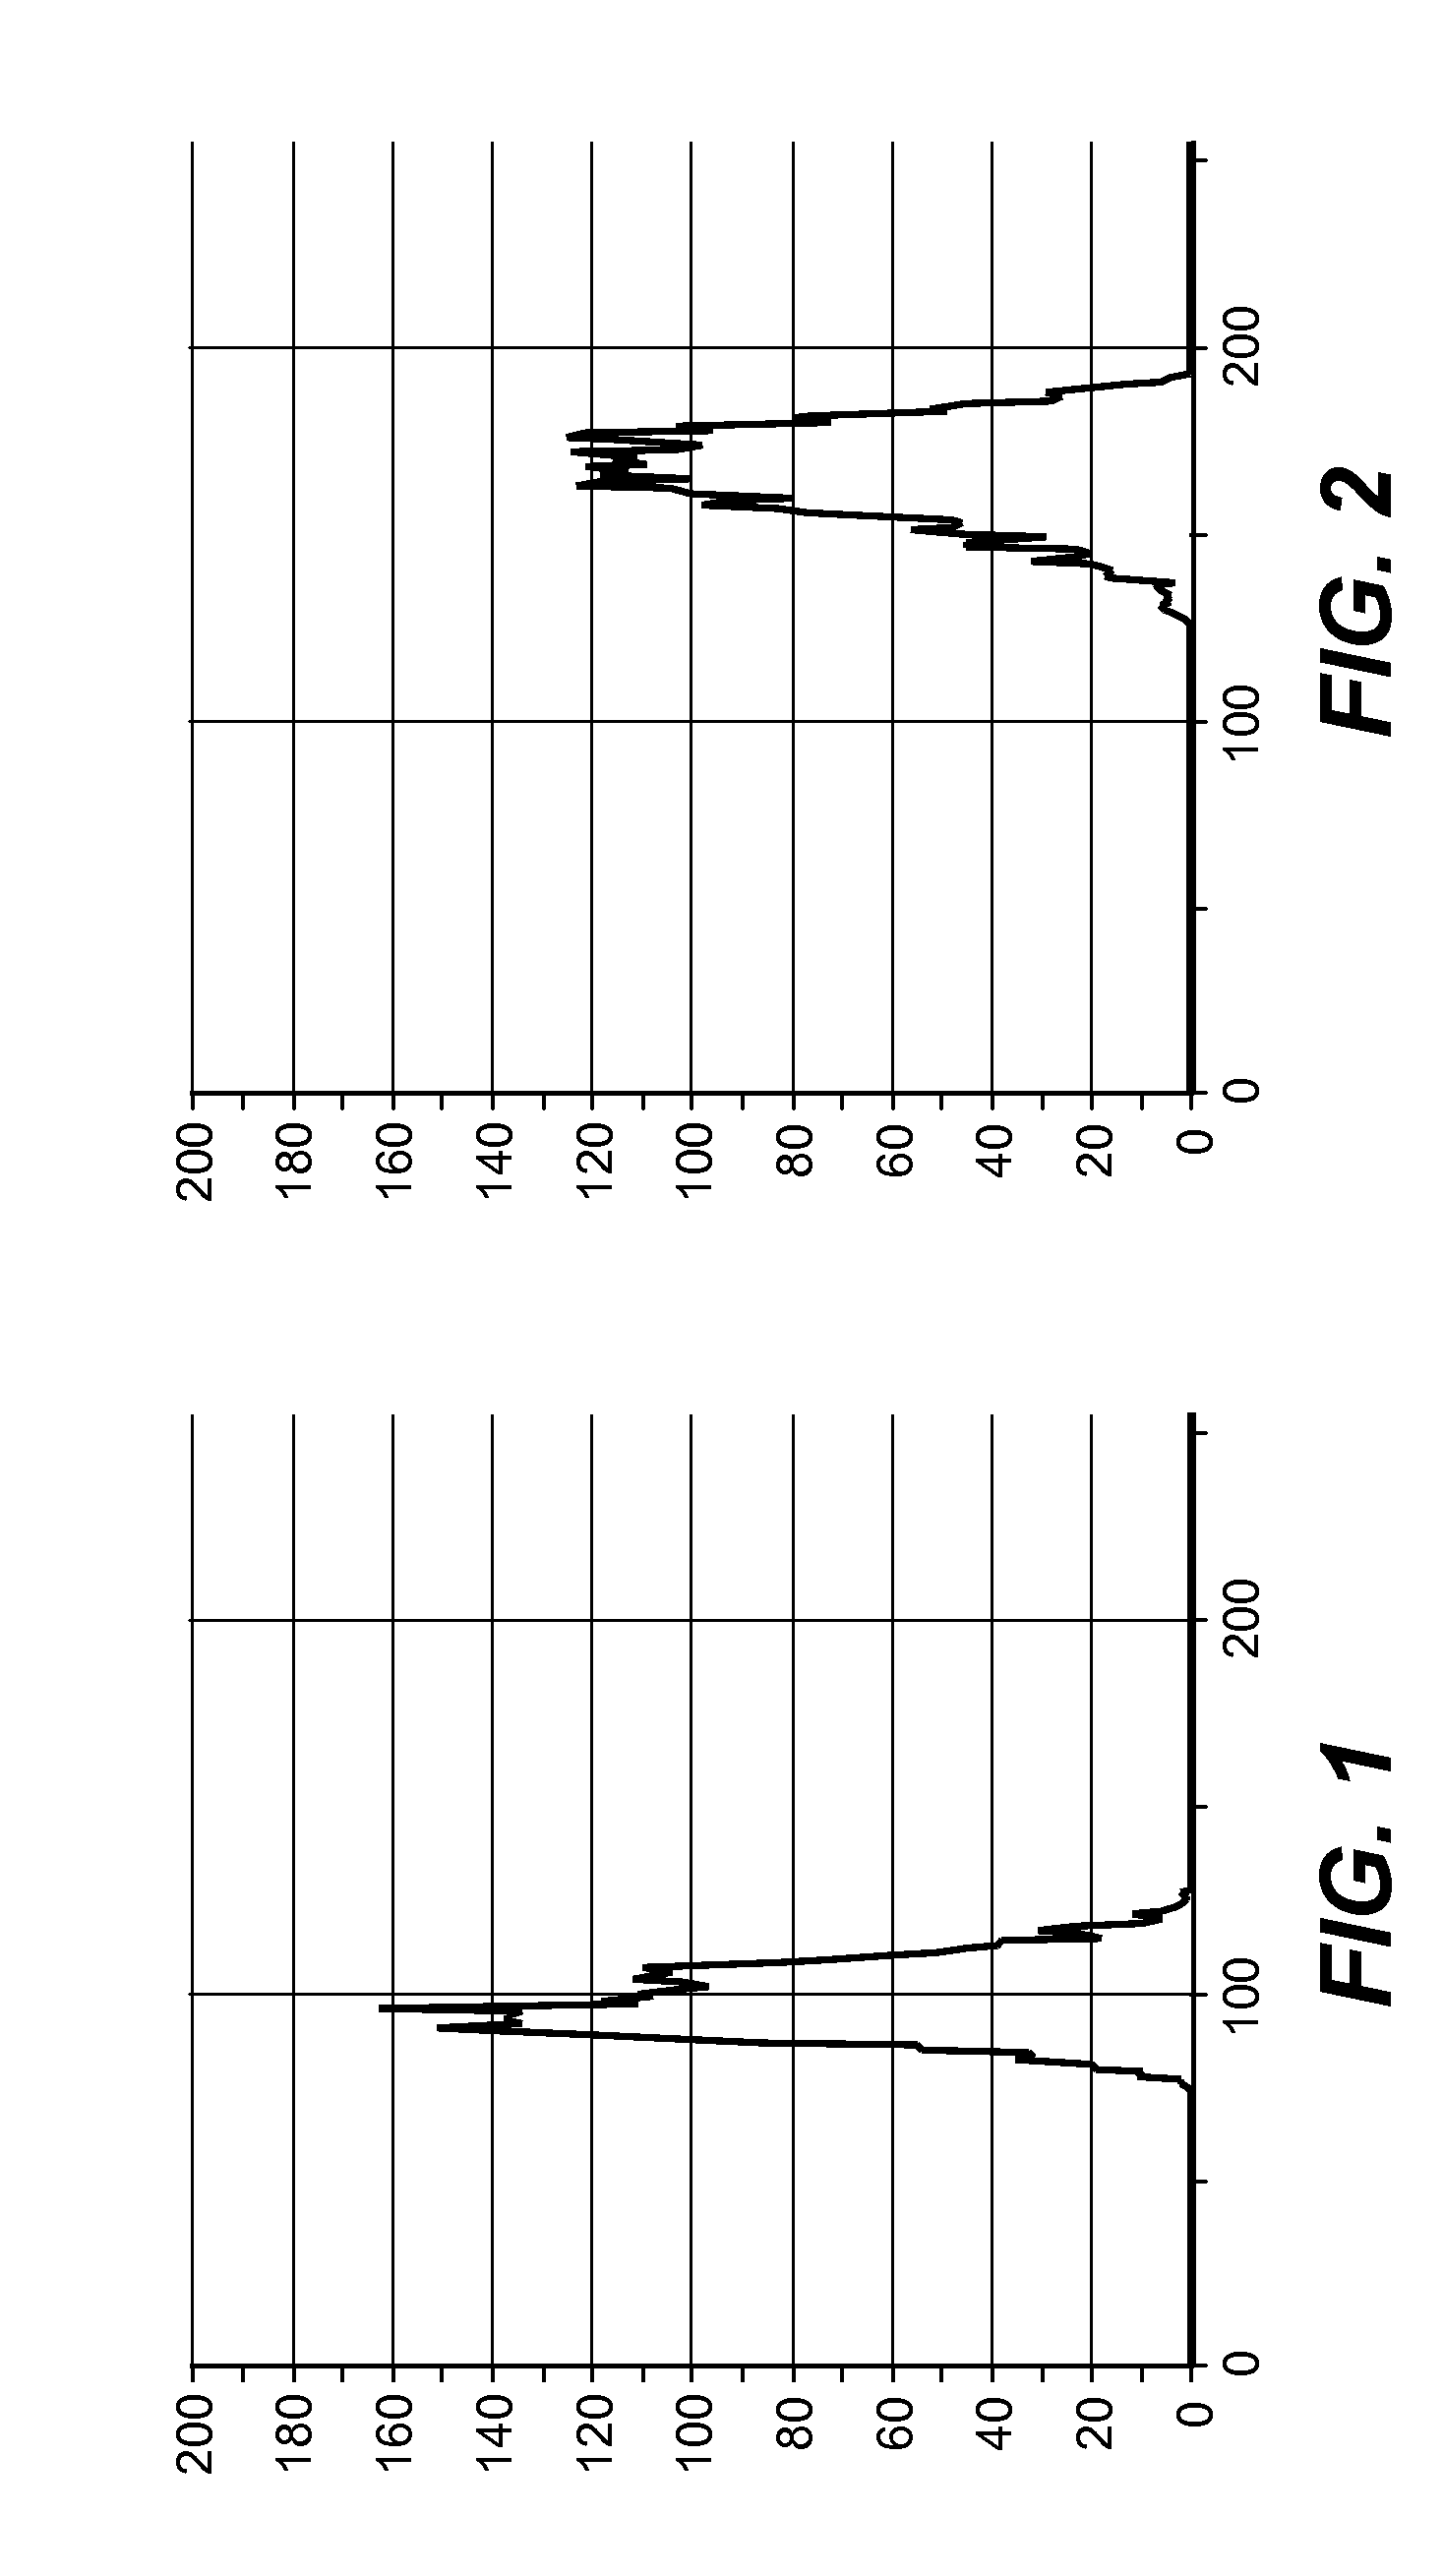 Preparation of porous particles with multiple markers